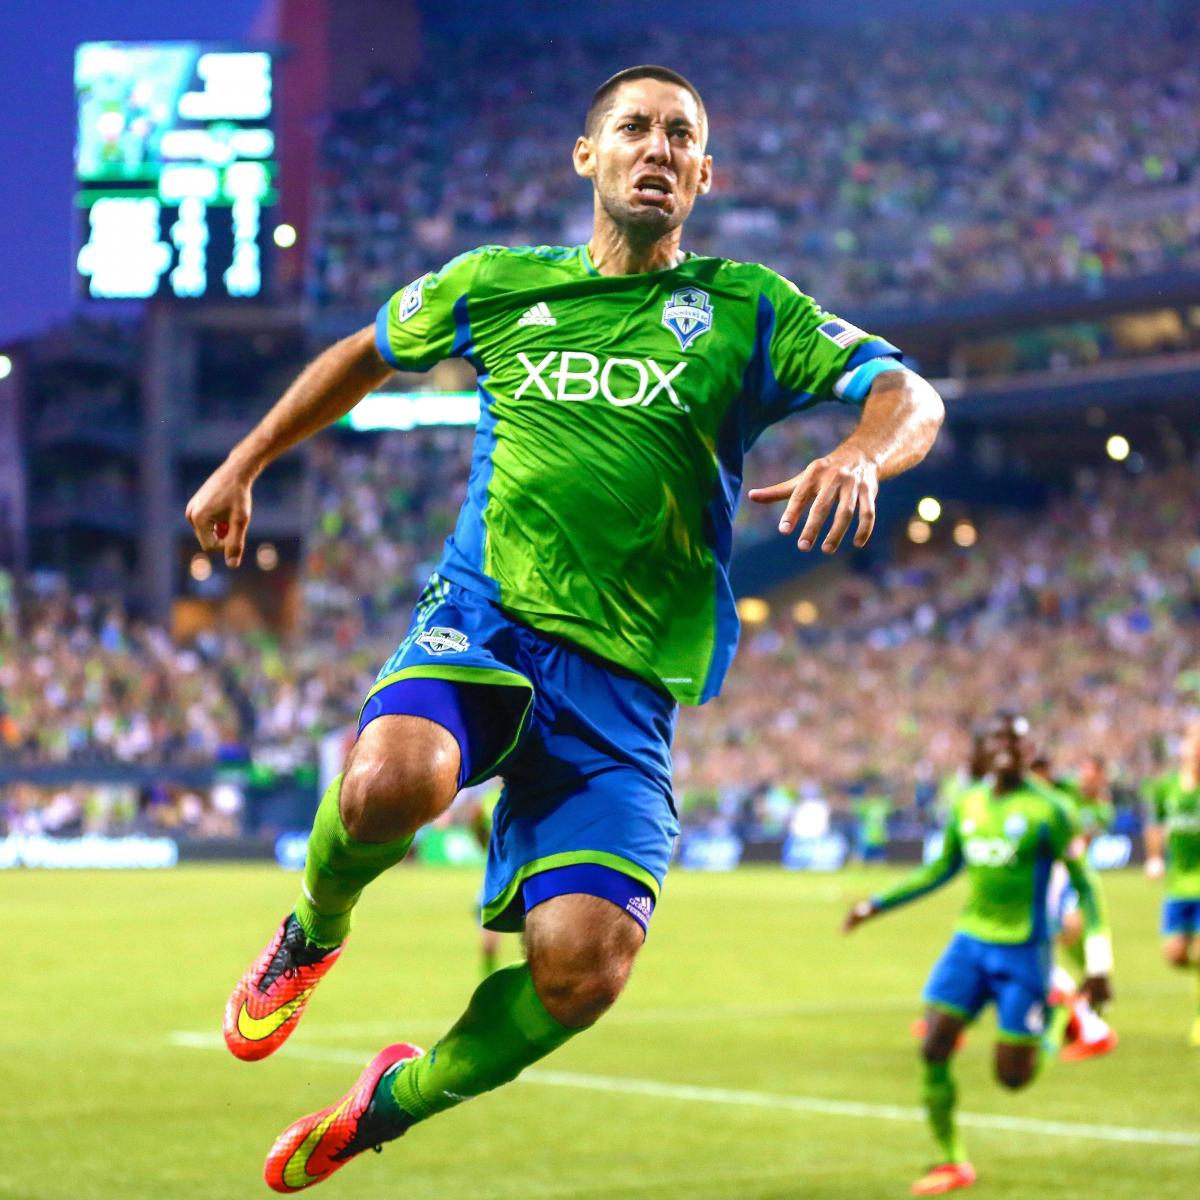 Discuss: What is your favorite Clint Dempsey memory?